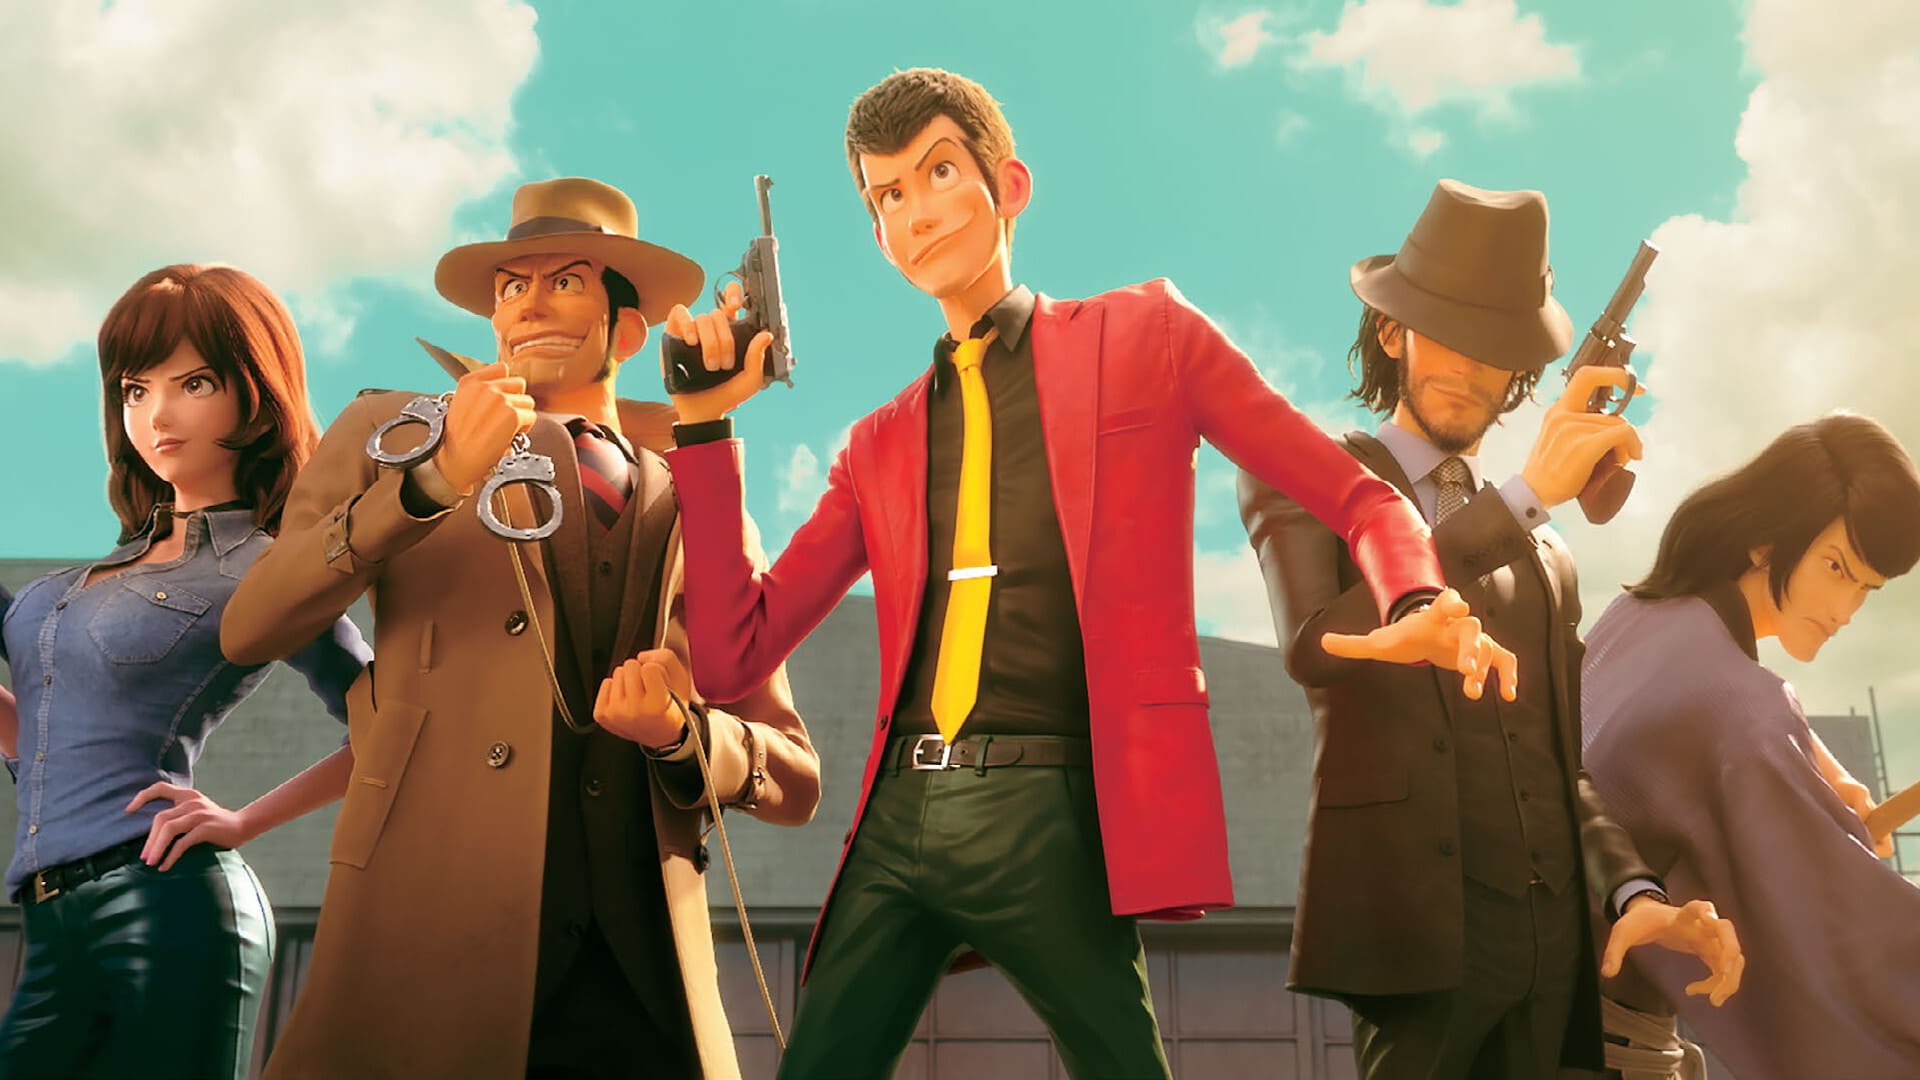 Lupin III: The First 2019 123movies